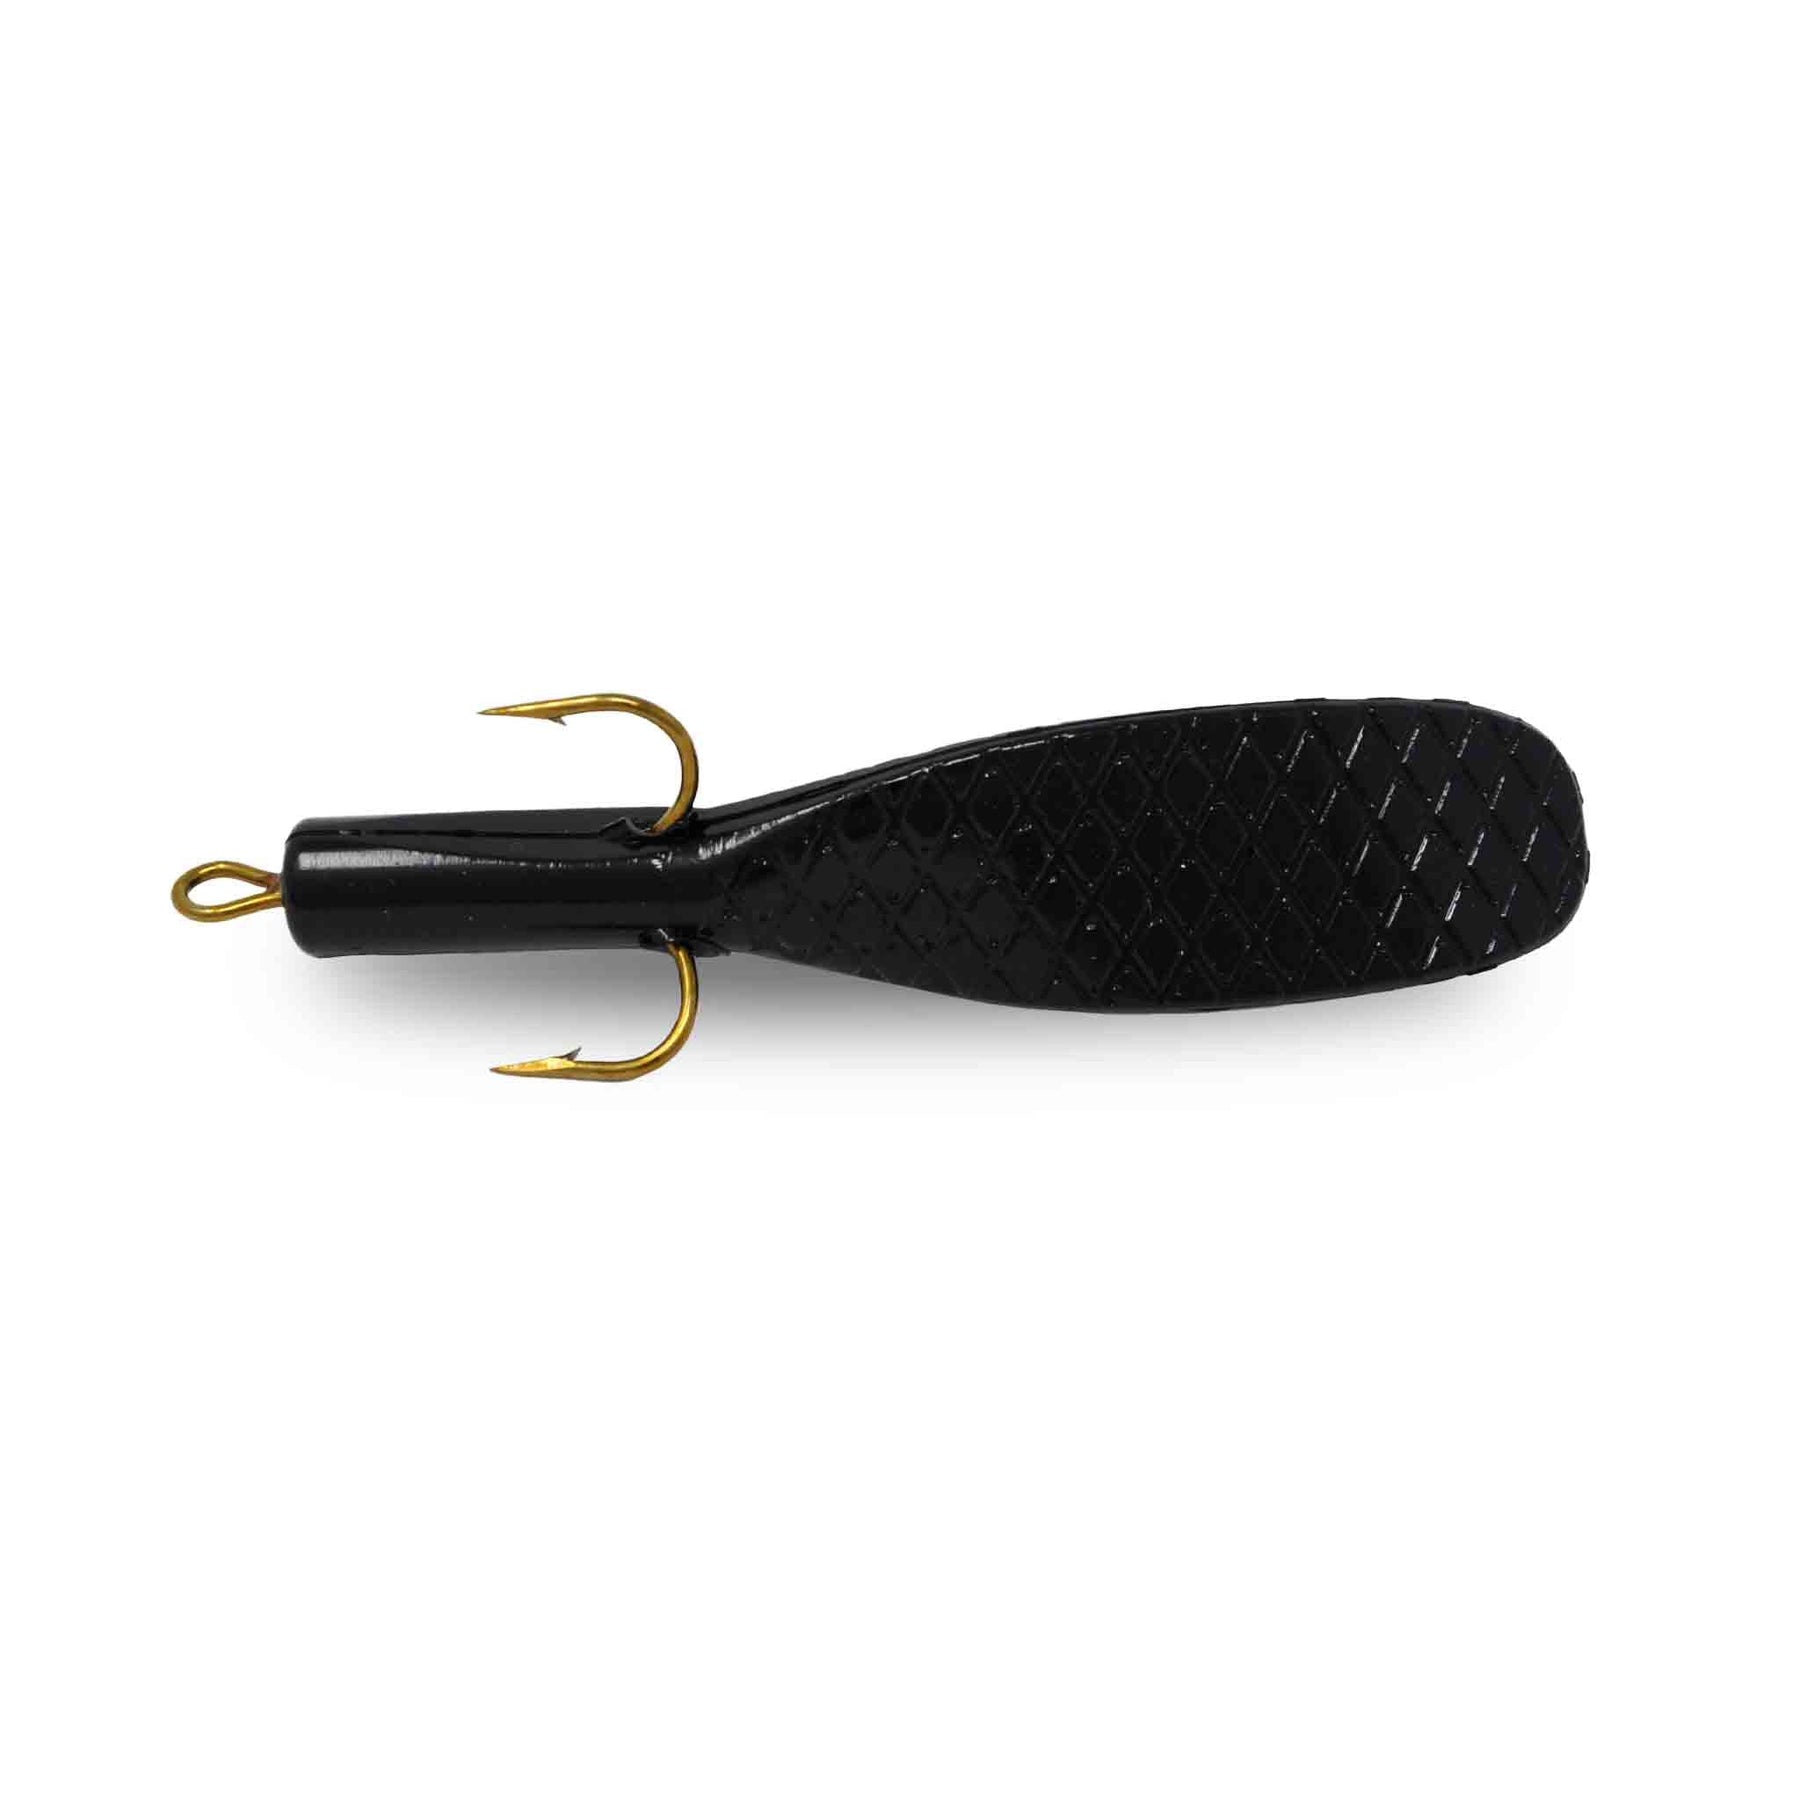 Beaver's Baits Baby Beaver Replacement Tail Black Replacement Tails